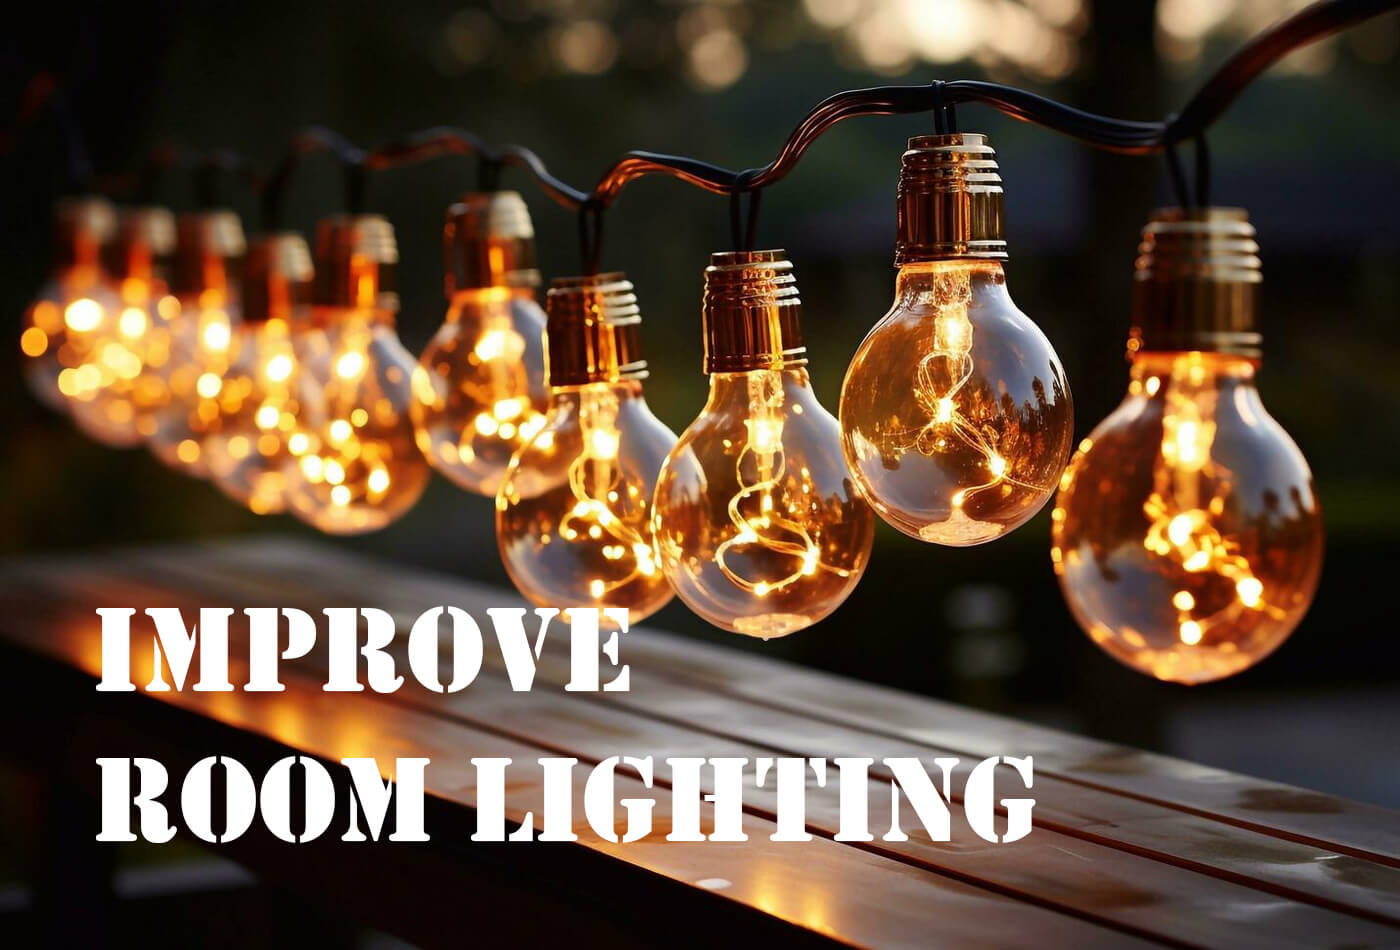 Helping to Improve Room Lighting in Easy Steps